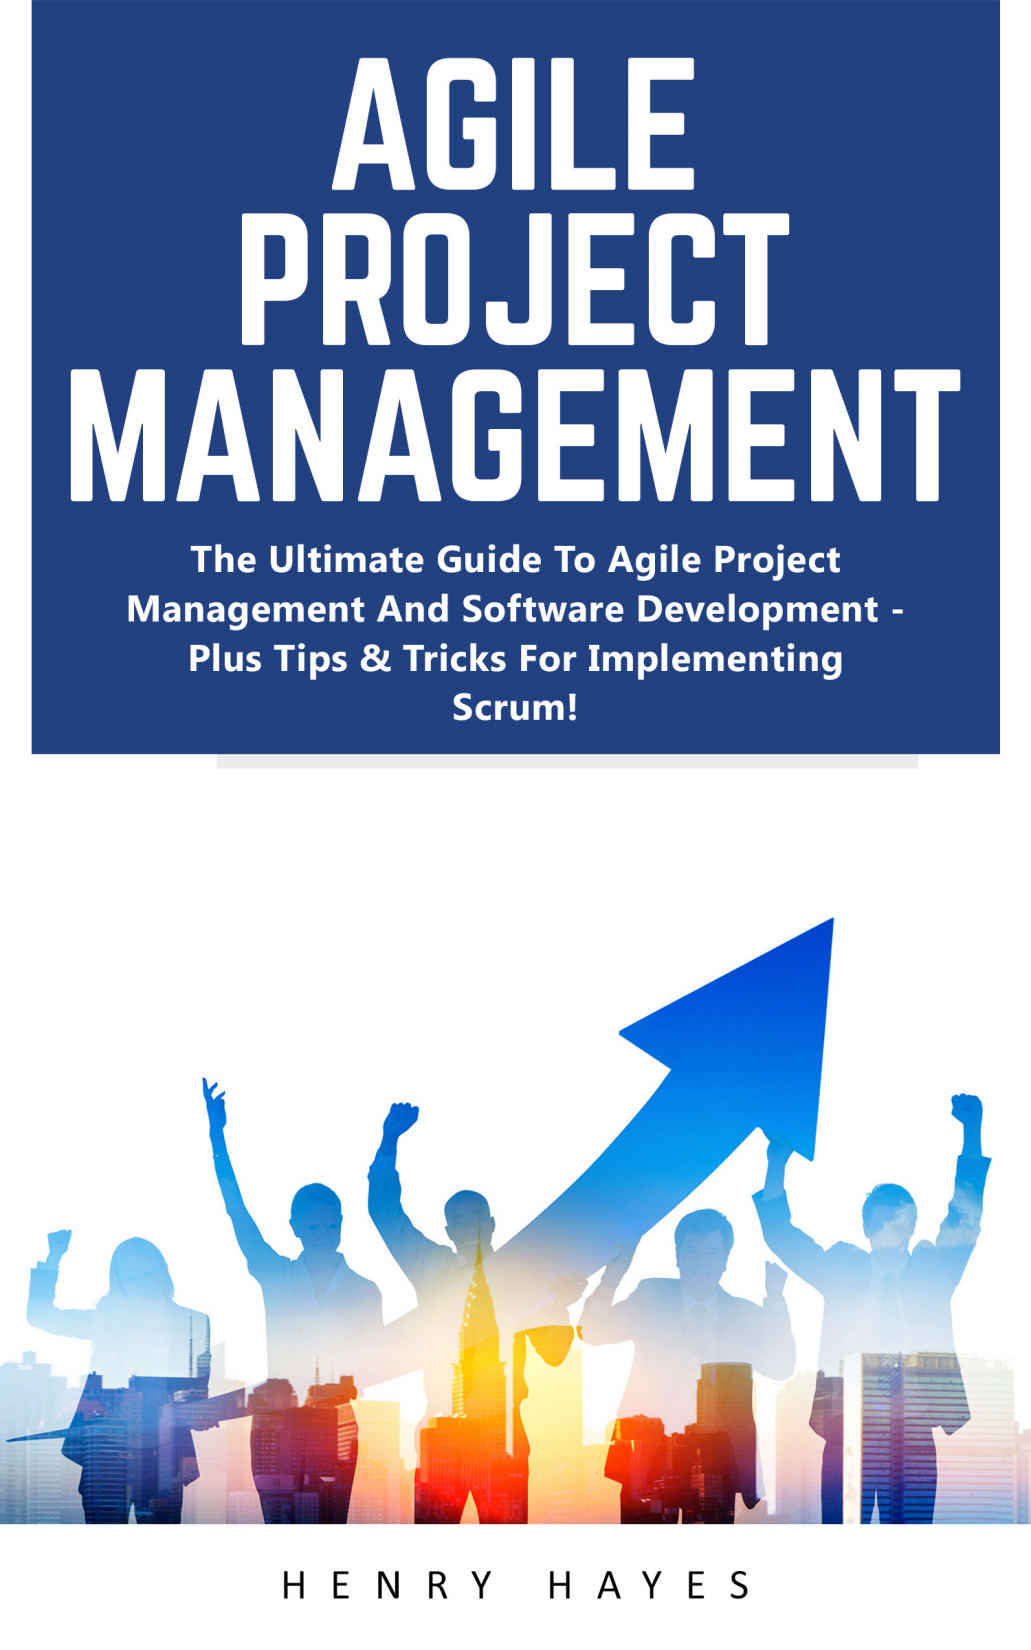 Agile Project Management: The Ultimate Guide To Agile Project Management And Software Development - Plus Tips & Tricks For Implementing Scrum!